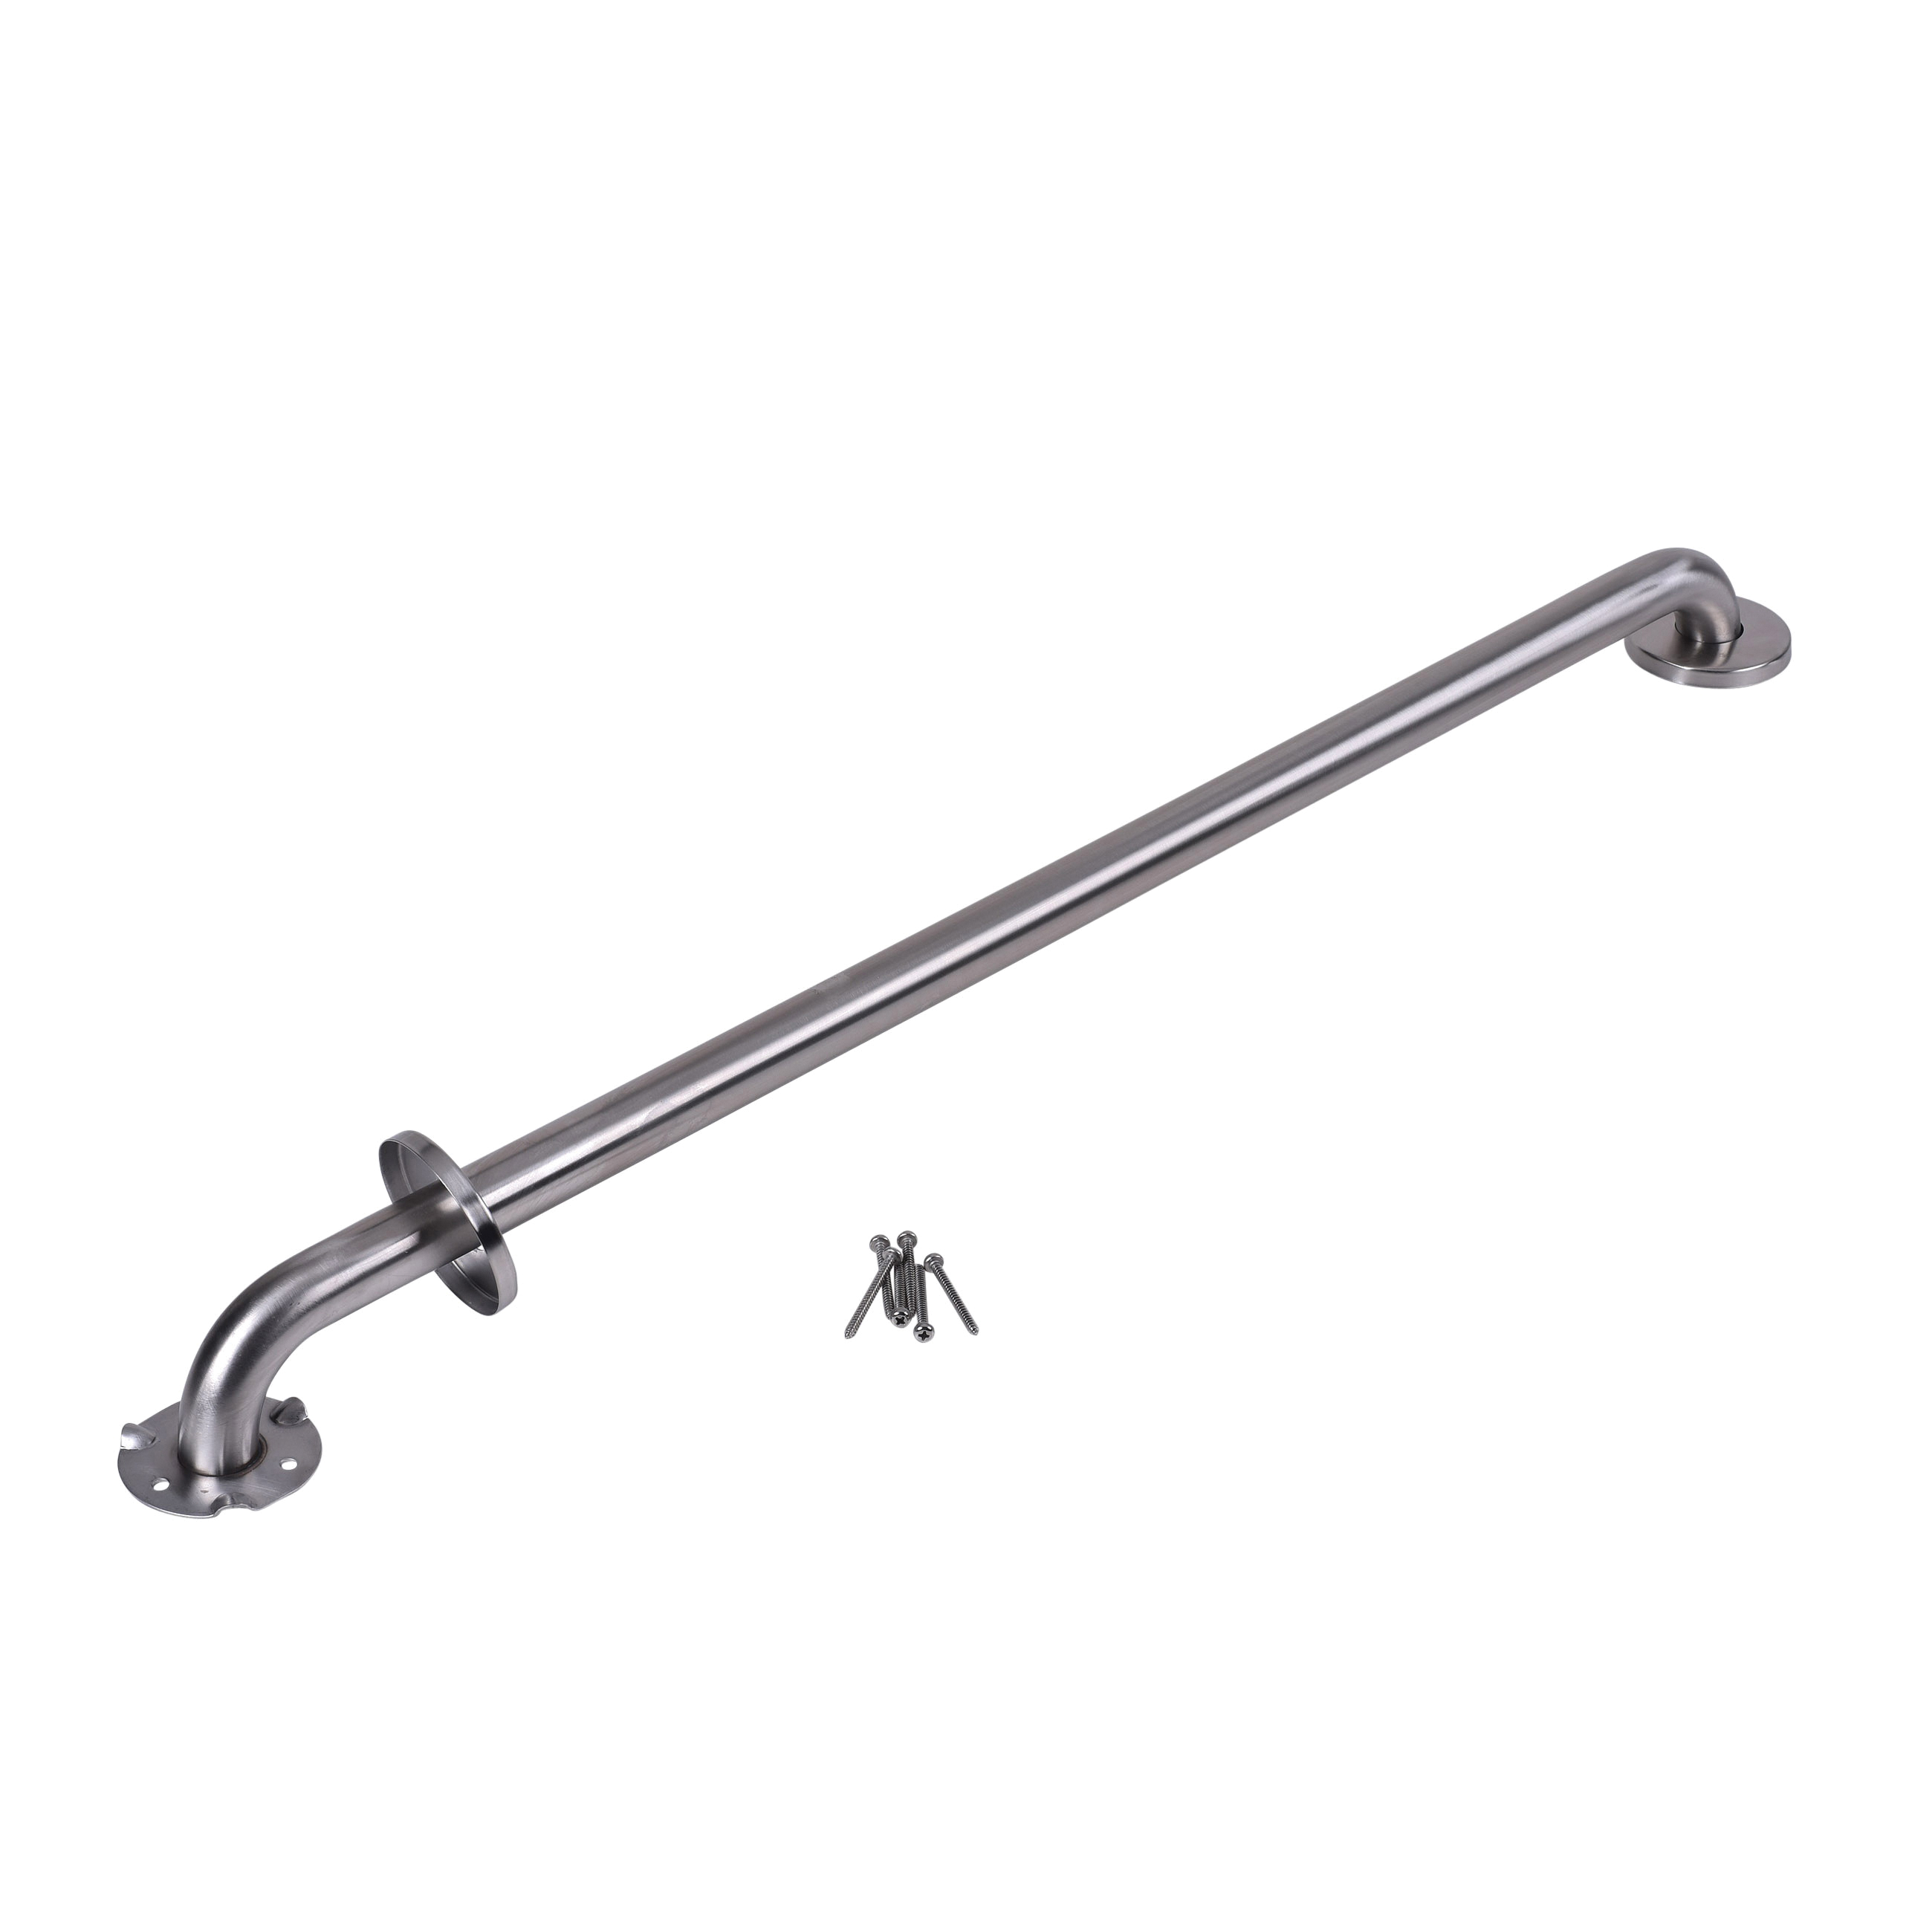 Dearborn® DB8736 Grab Bar, 1-1/4 in Dia x 36 in L, Satin, 304 Stainless Steel, Import